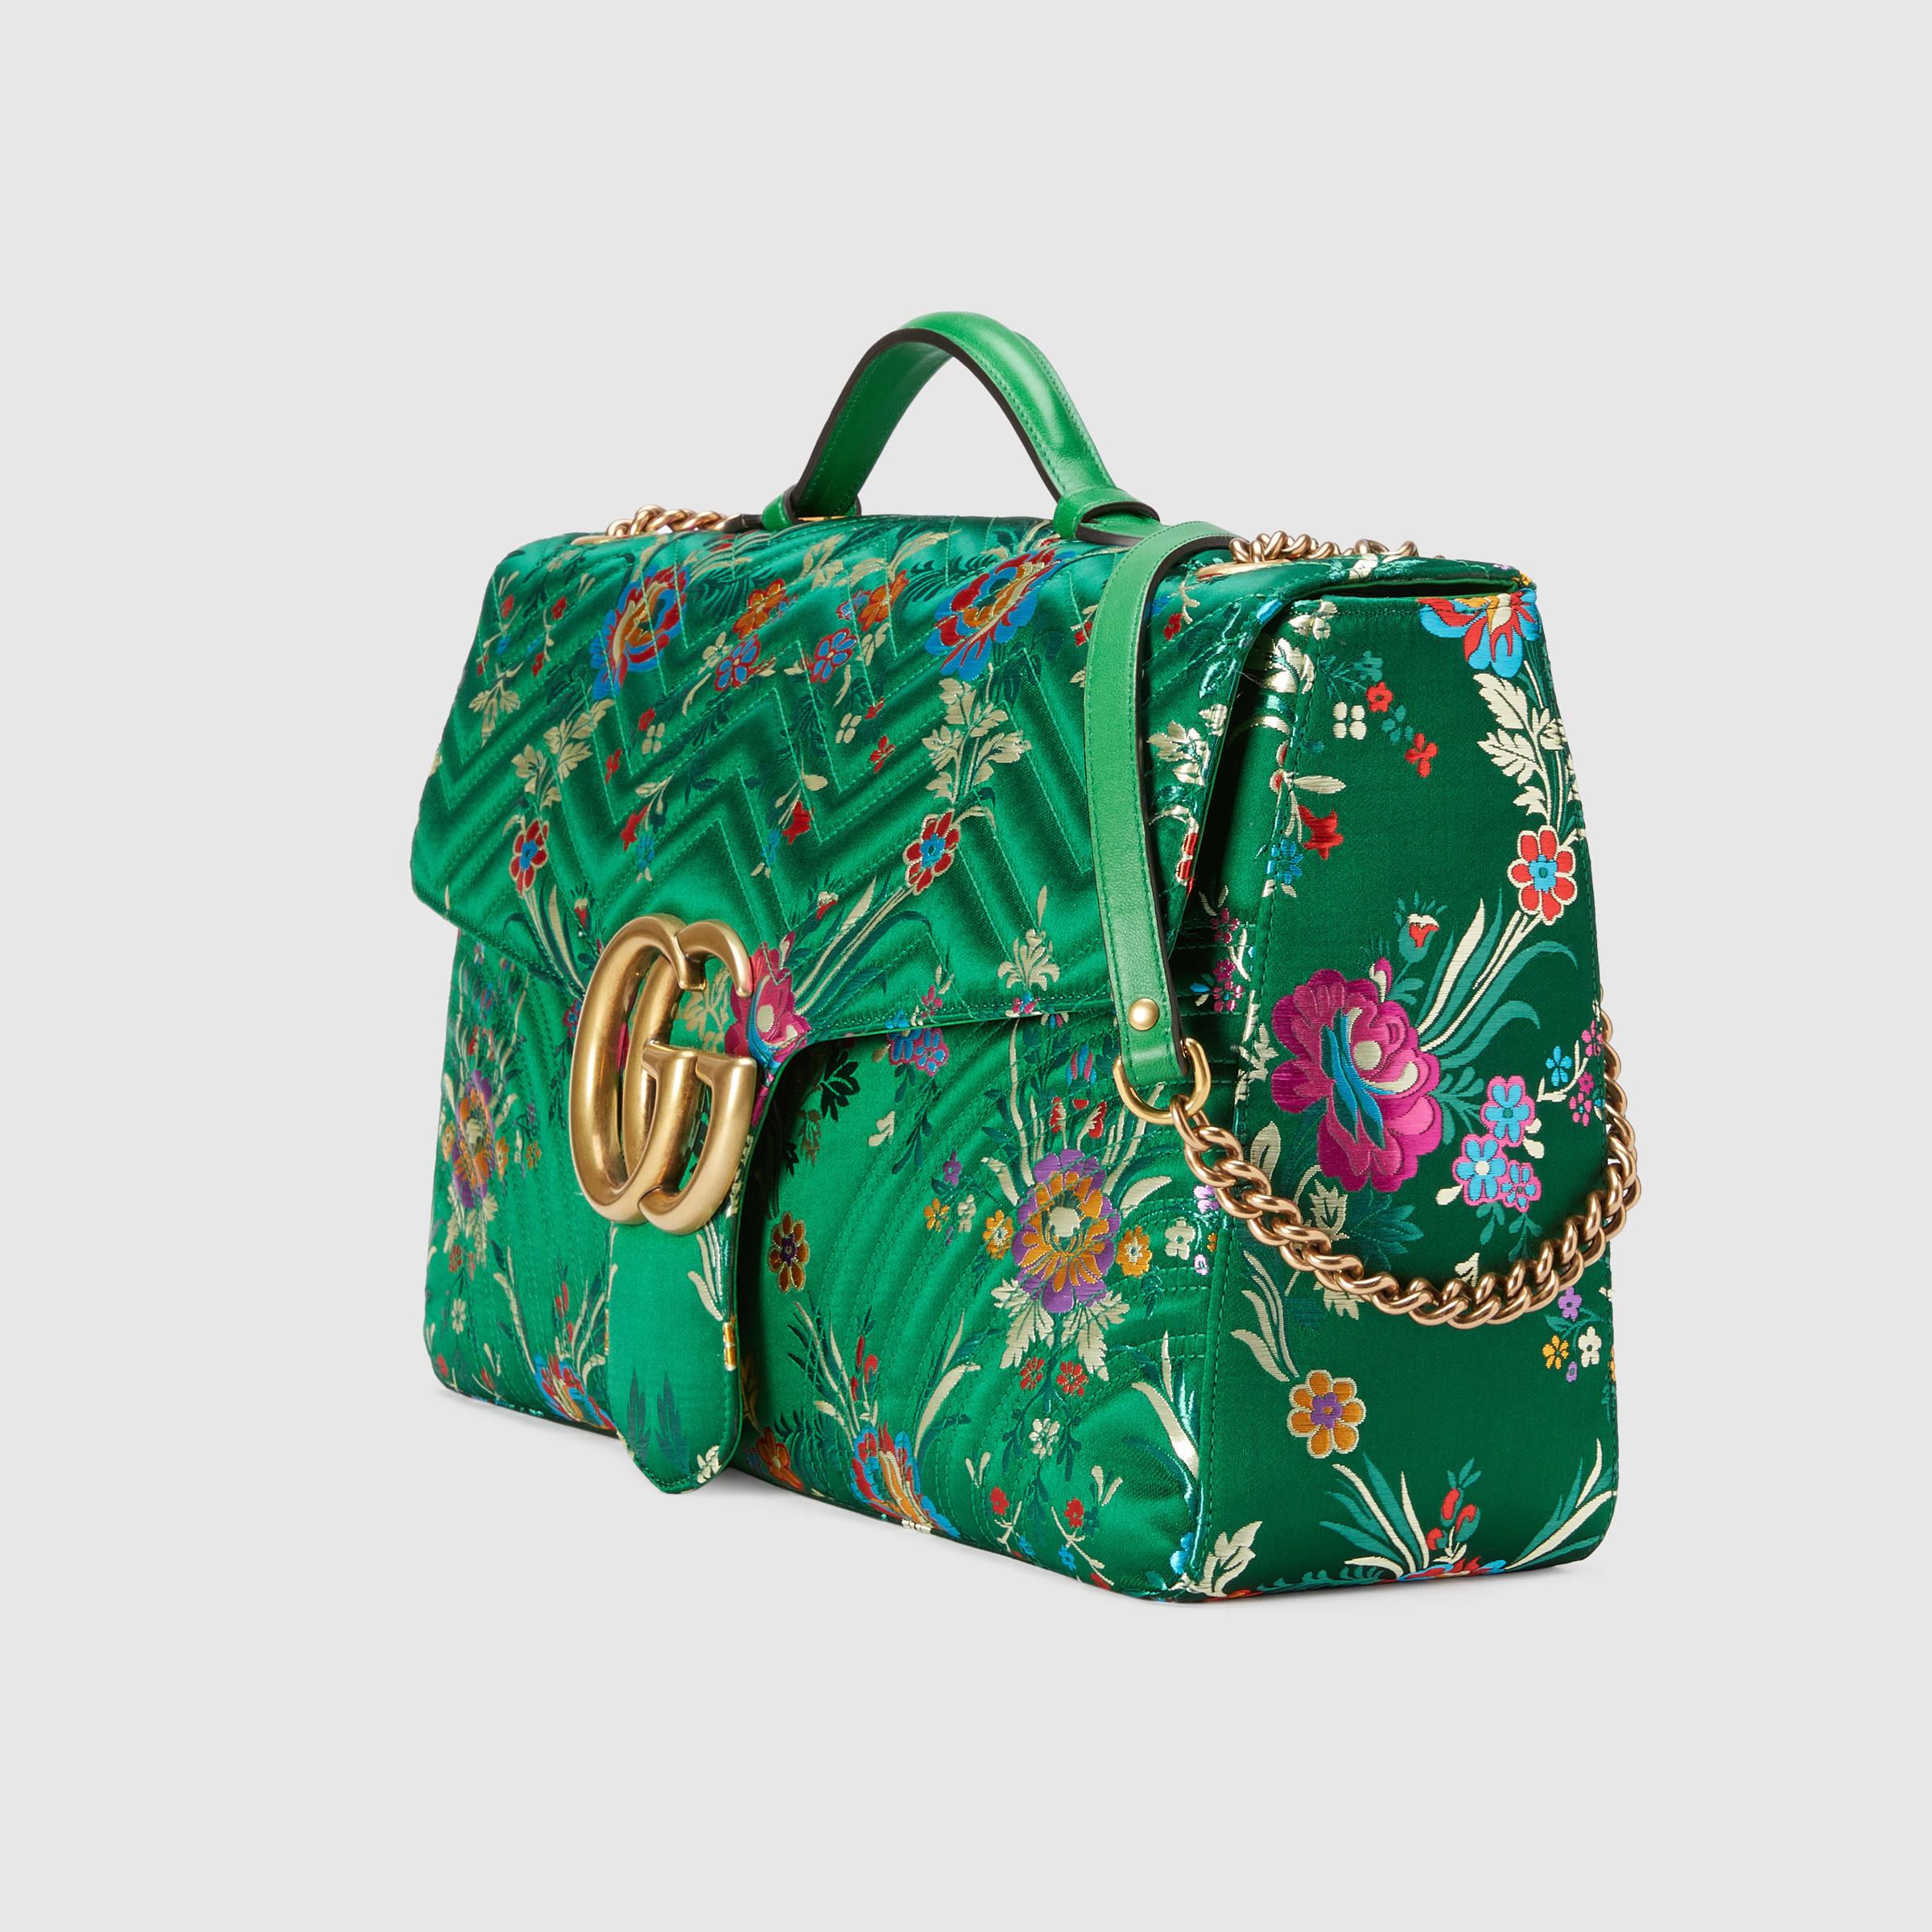 Lyst - Gucci Gg Marmont Maxi Floral Jacquard Shoulder Bag in Green